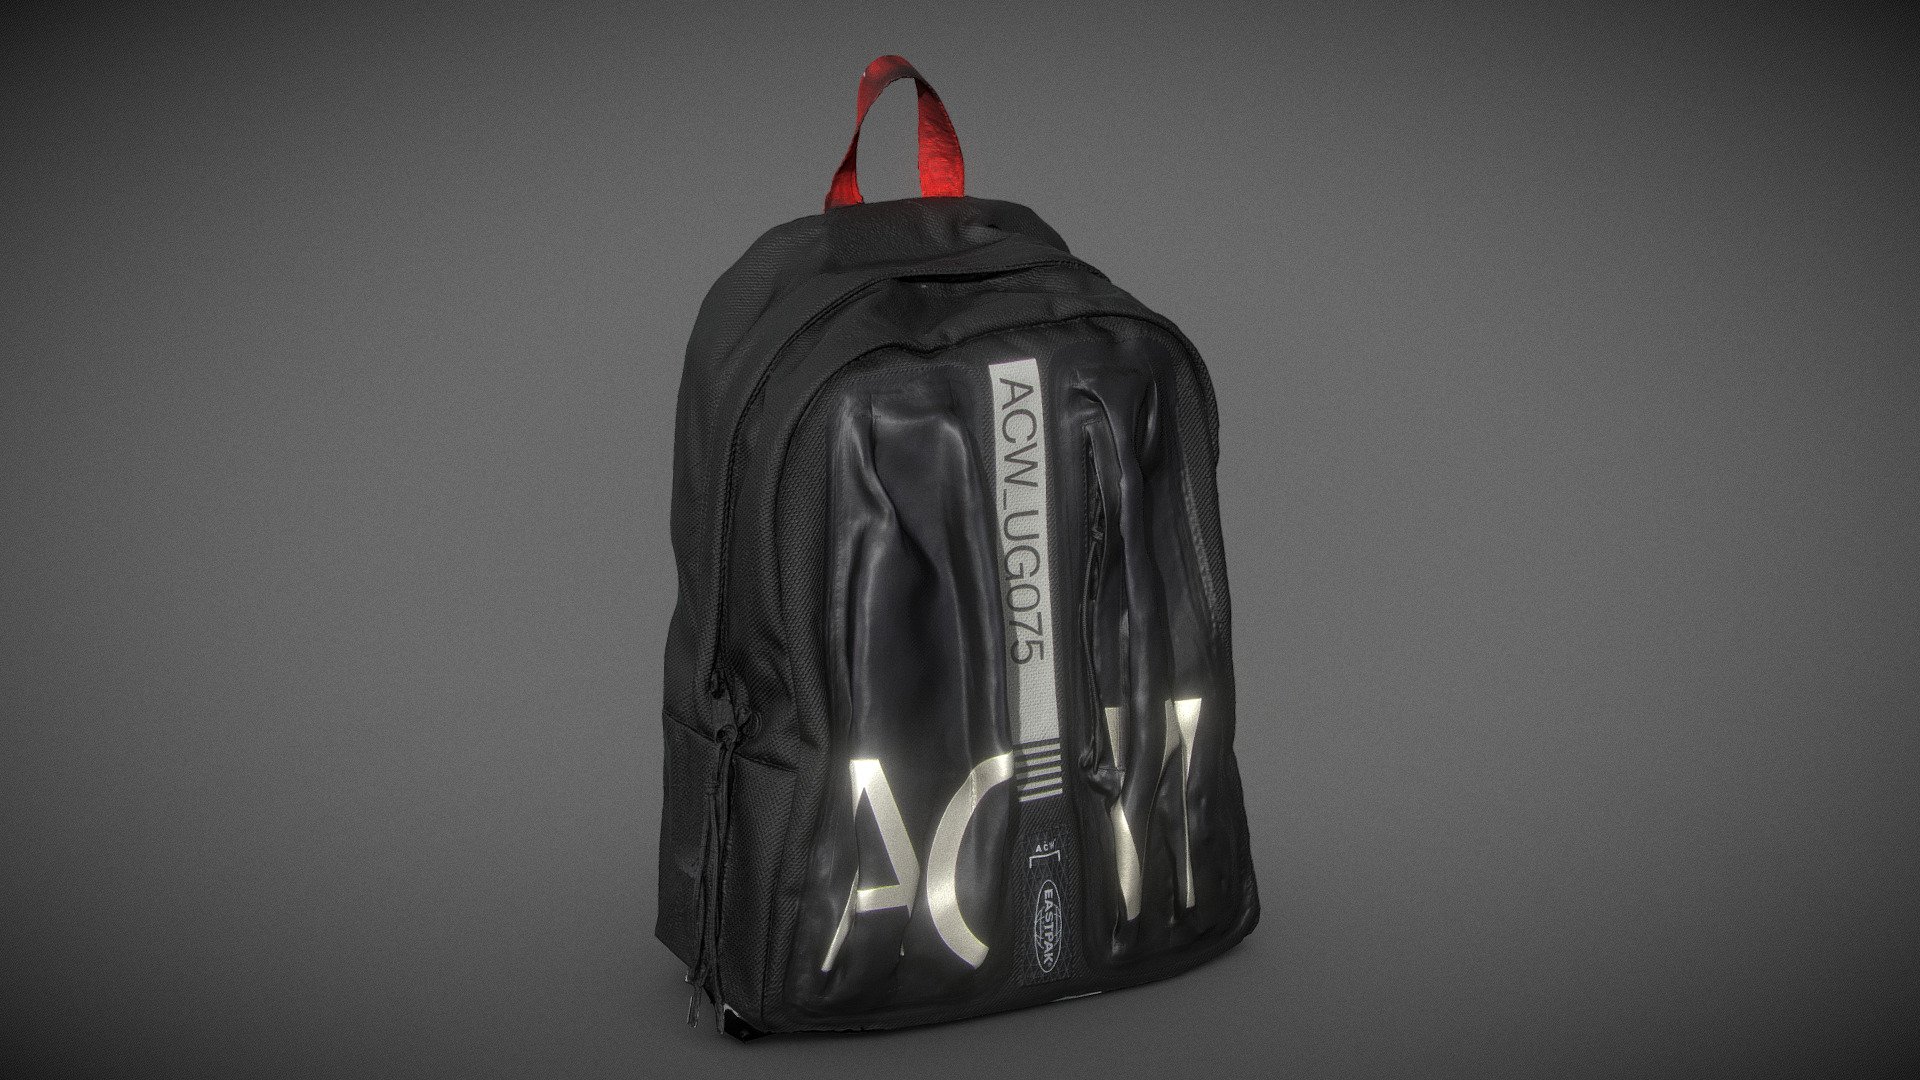 3D scan of this ACW* X Eastpak Ruched Backpack collab.
Made with 300 pictures, PBR MODEL 250k triangles. 
Didn't have the time to do the bottom sorry 3d model